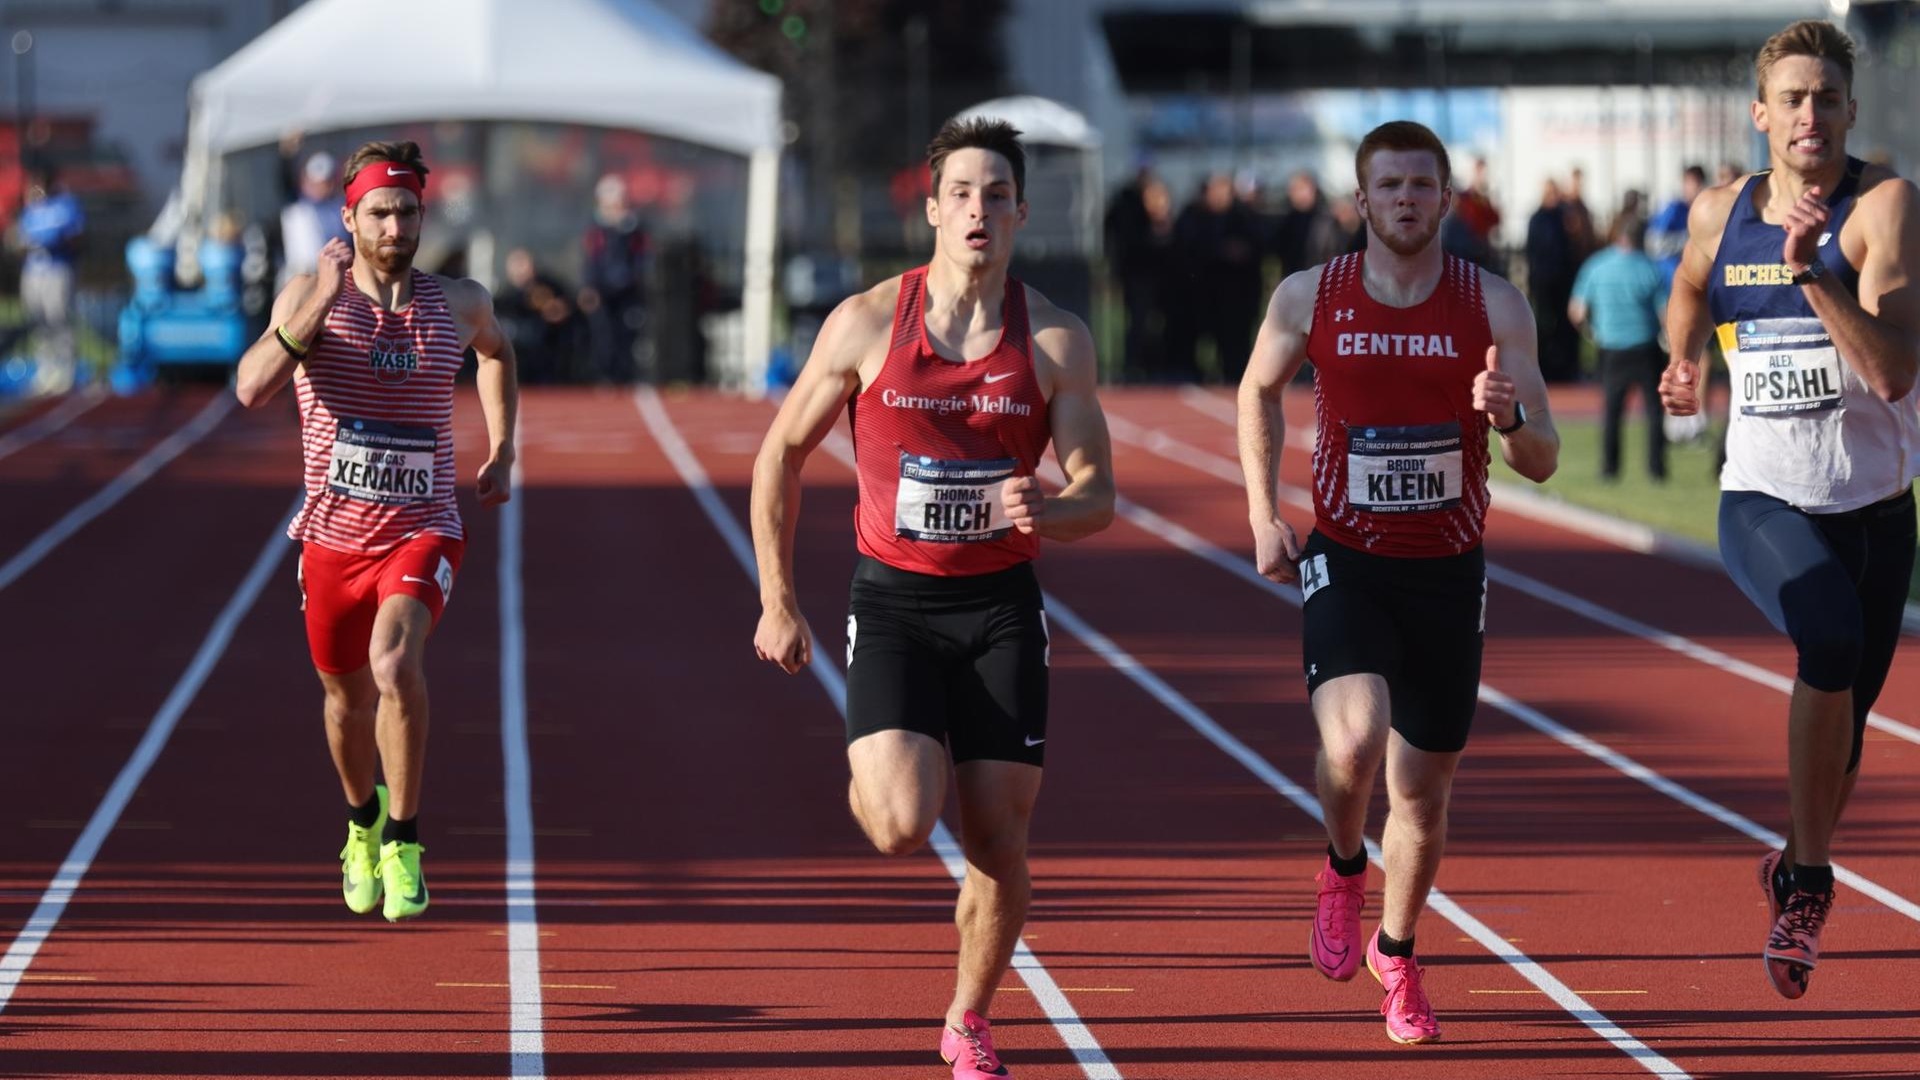 Rich Currently Seventh in Decathlon Following First Day at NCAA Outdoor Championships, McLaughlin Qualifies for Finals of 1,500